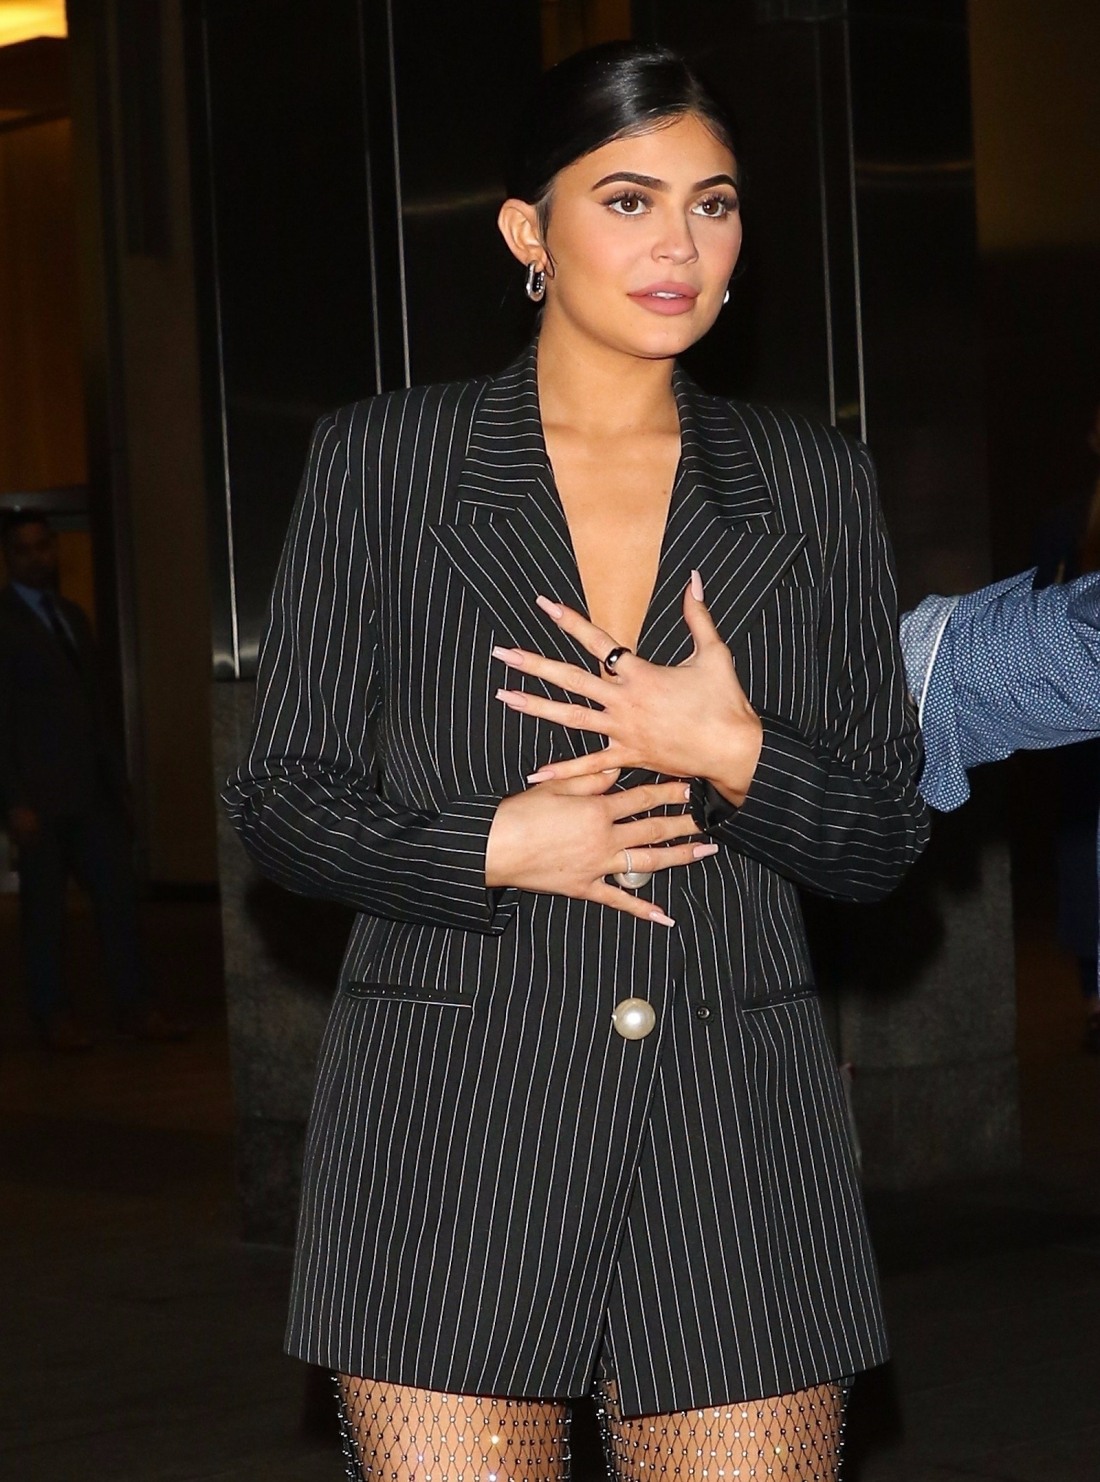 Kylie Jenner leaves dinner at Nobu stops to take photos with fans!